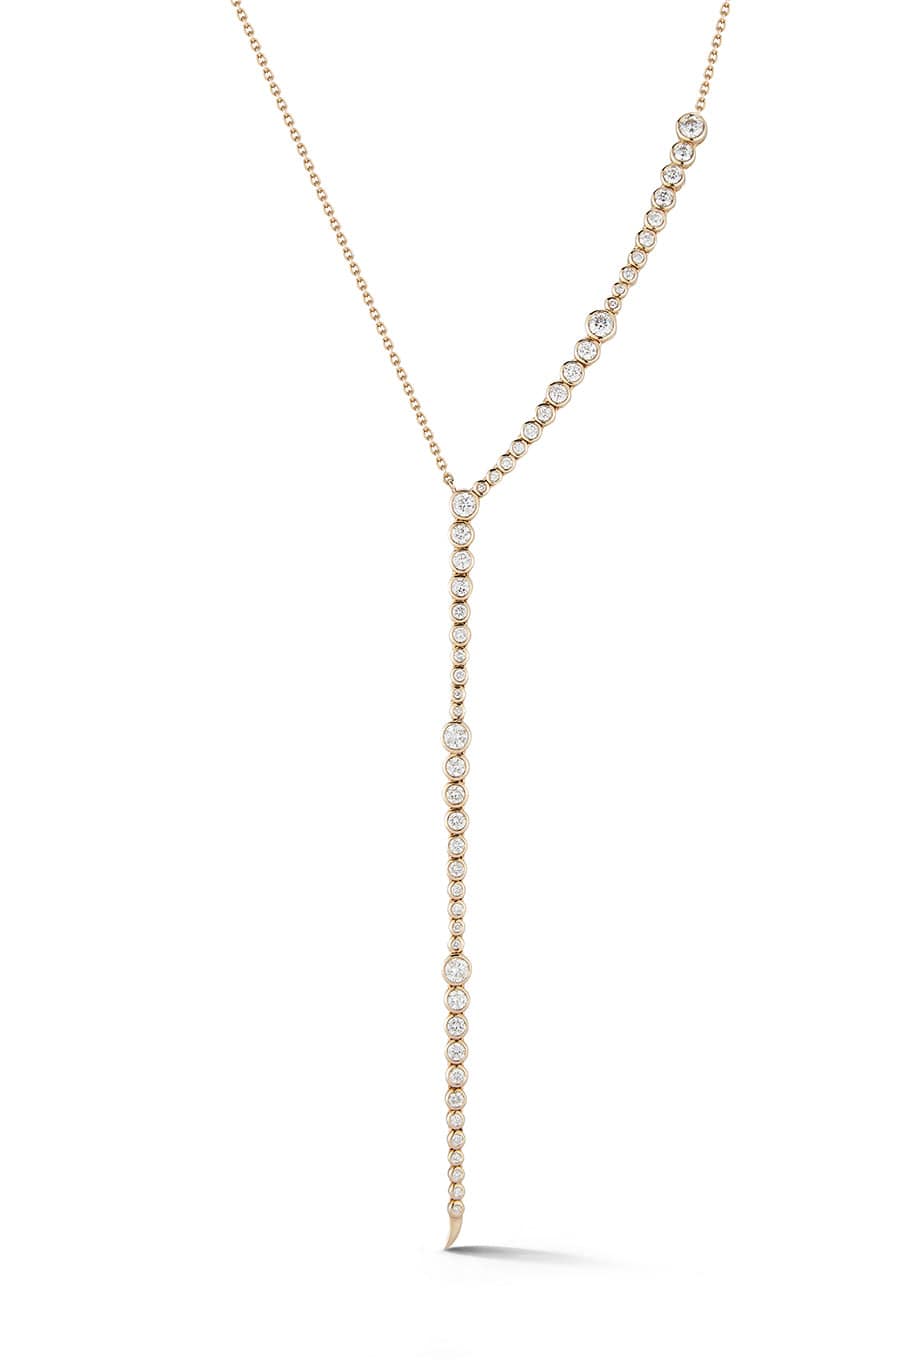 ONDYN-Simone Necklace-YELLOW GOLD